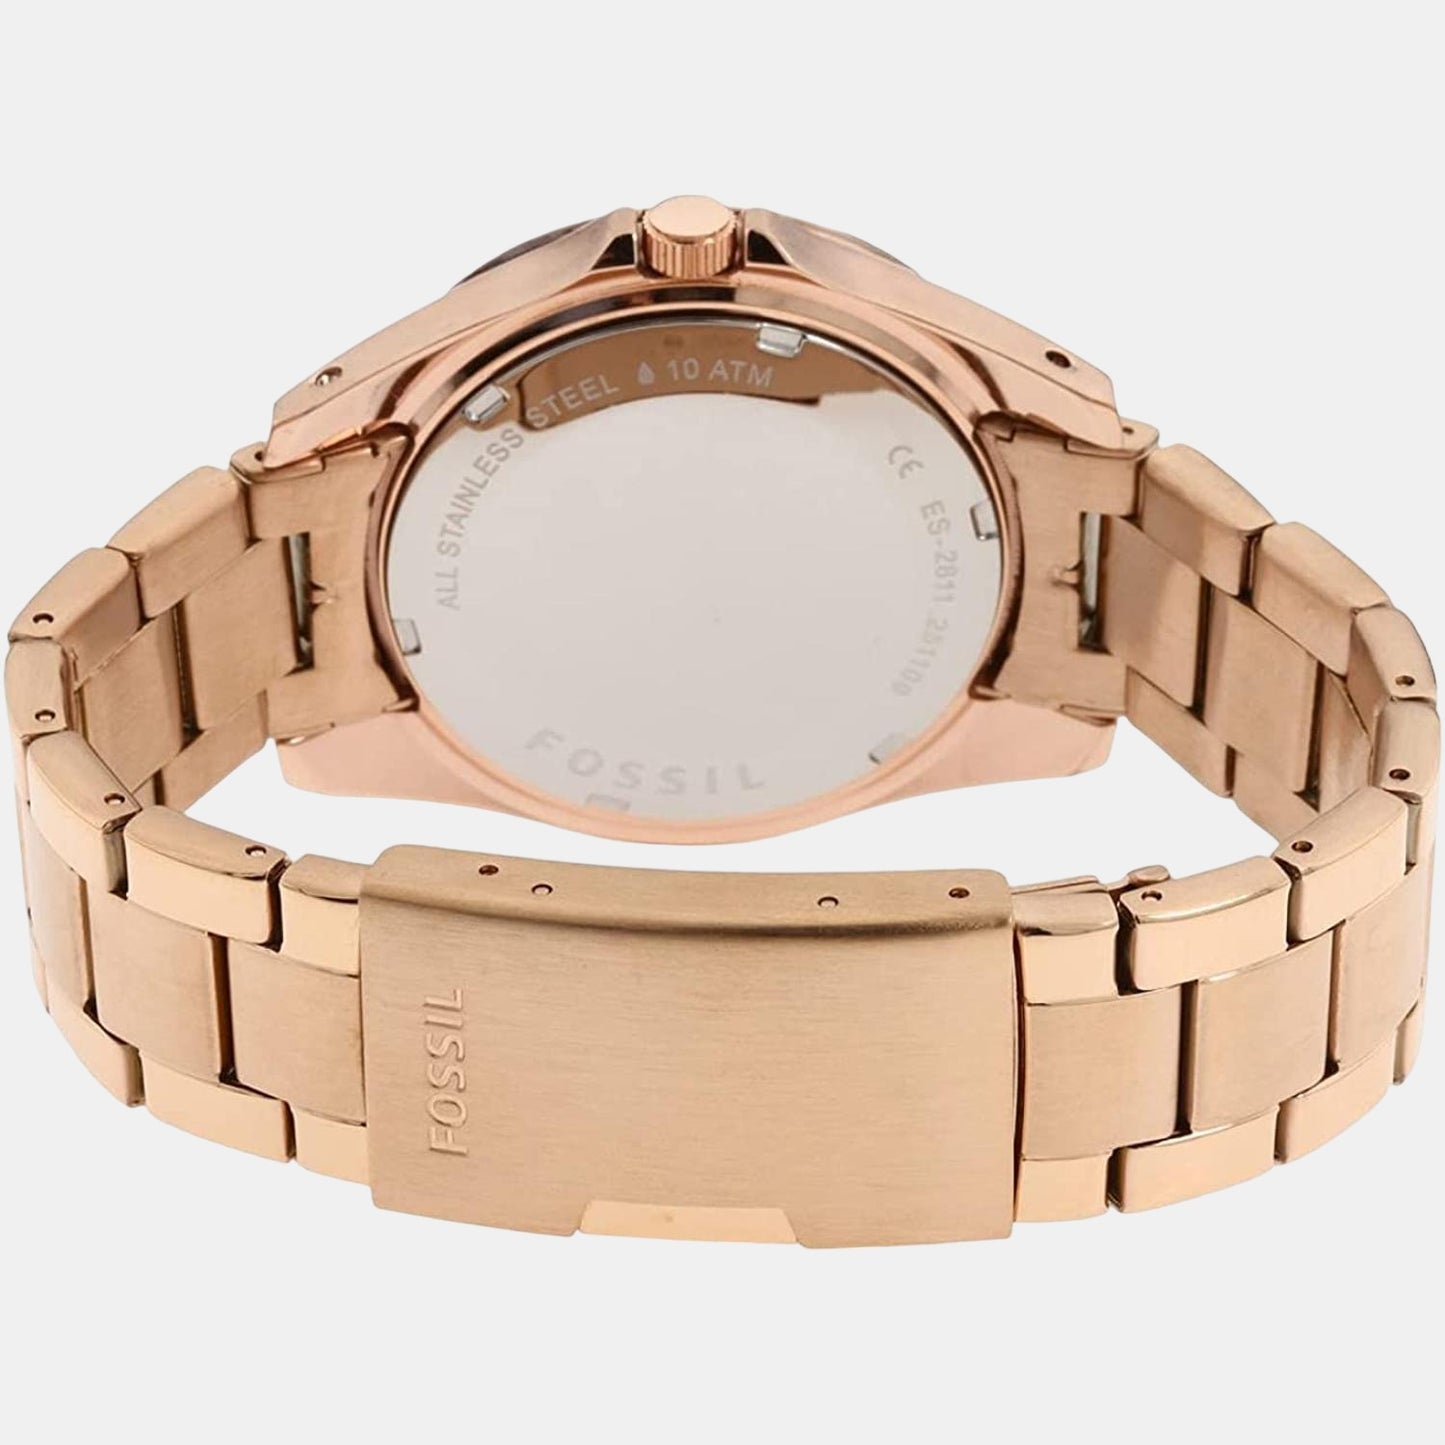 Female Rose Gold Stainless Steel Chronograph Watch ES2811I